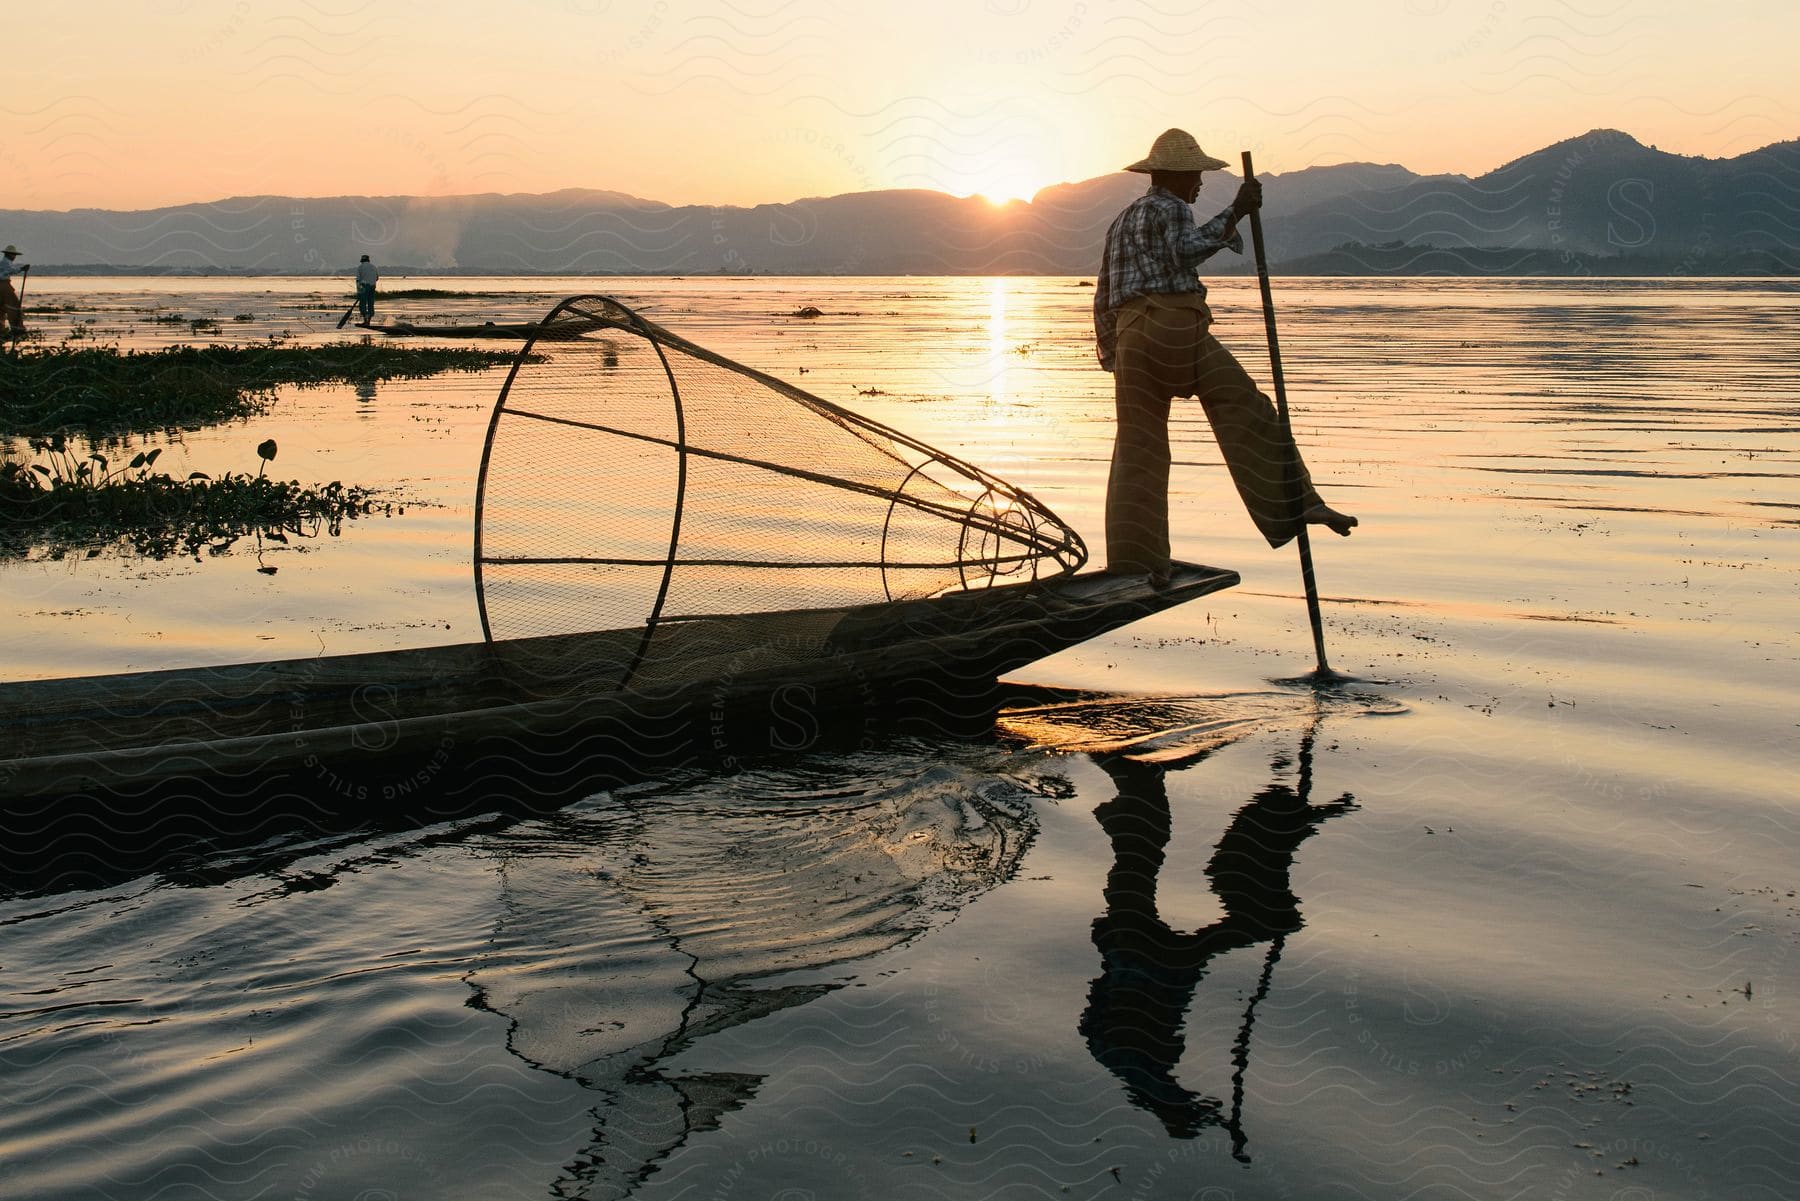 A fisherman drives a canoe with a net in a river surrounded by mountains during sunrise